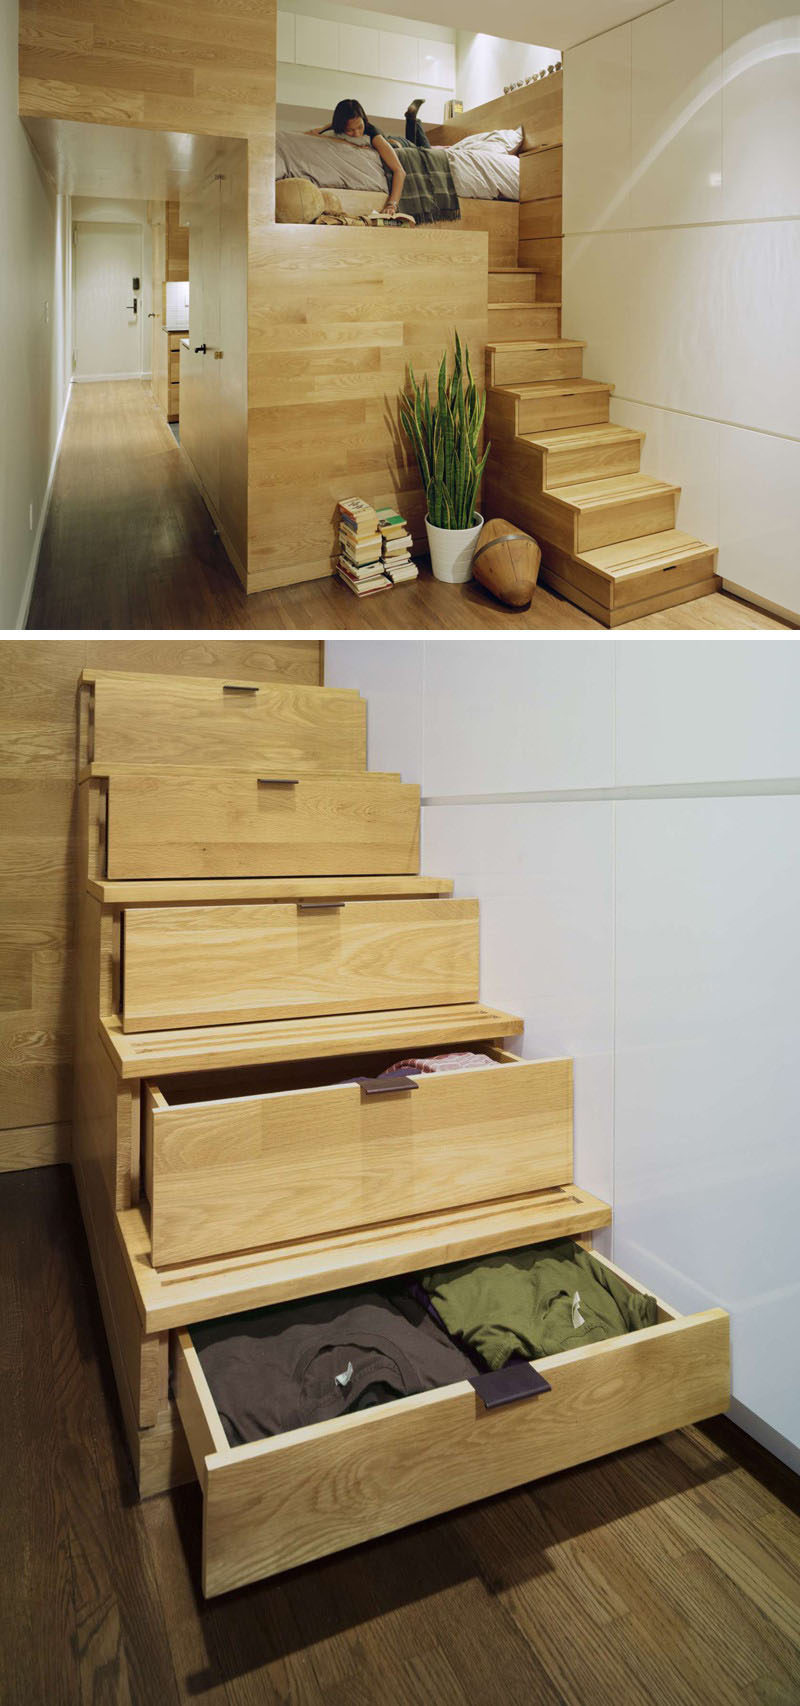 storage ideas for small spaces with wooden floor